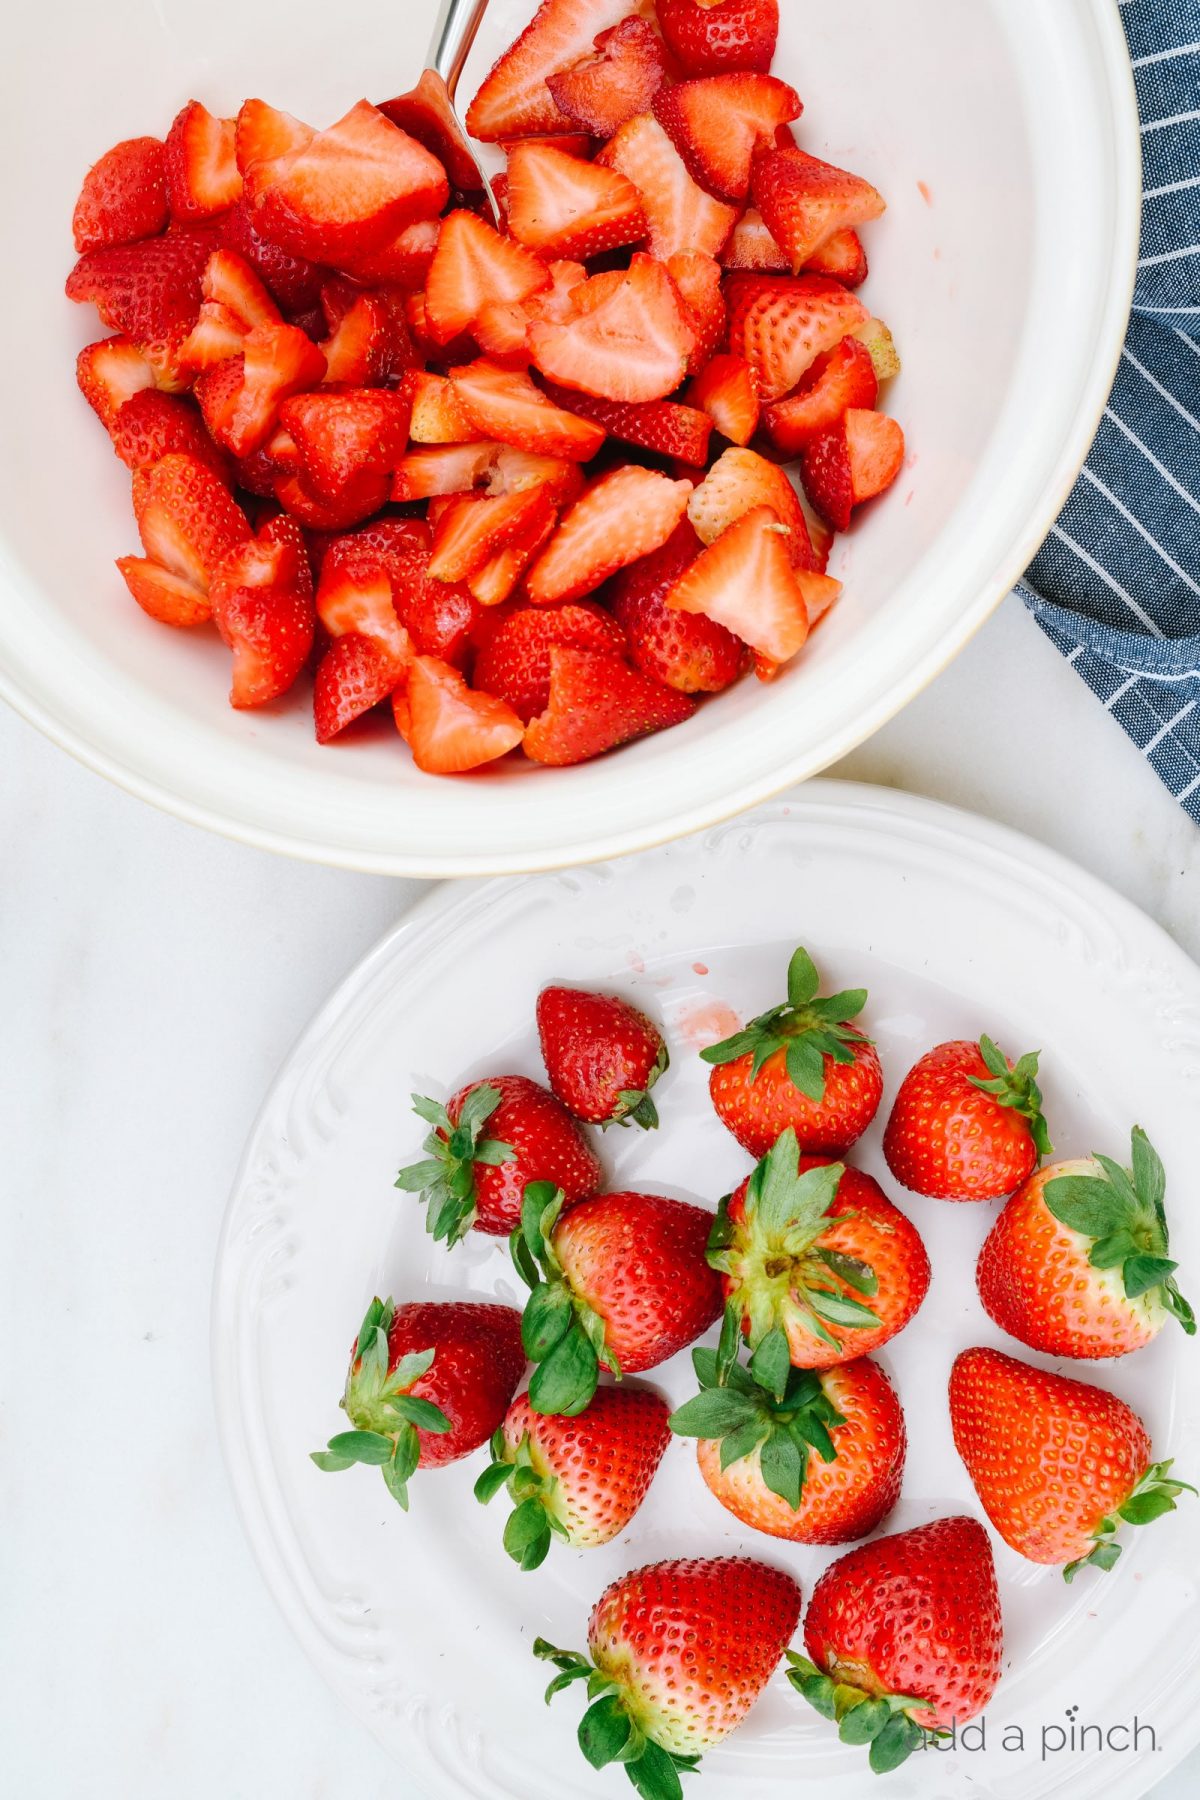 Photograph of strawberries on a white plate and sliced strawberries in a white bowl on a white marble background. // addapinch.com